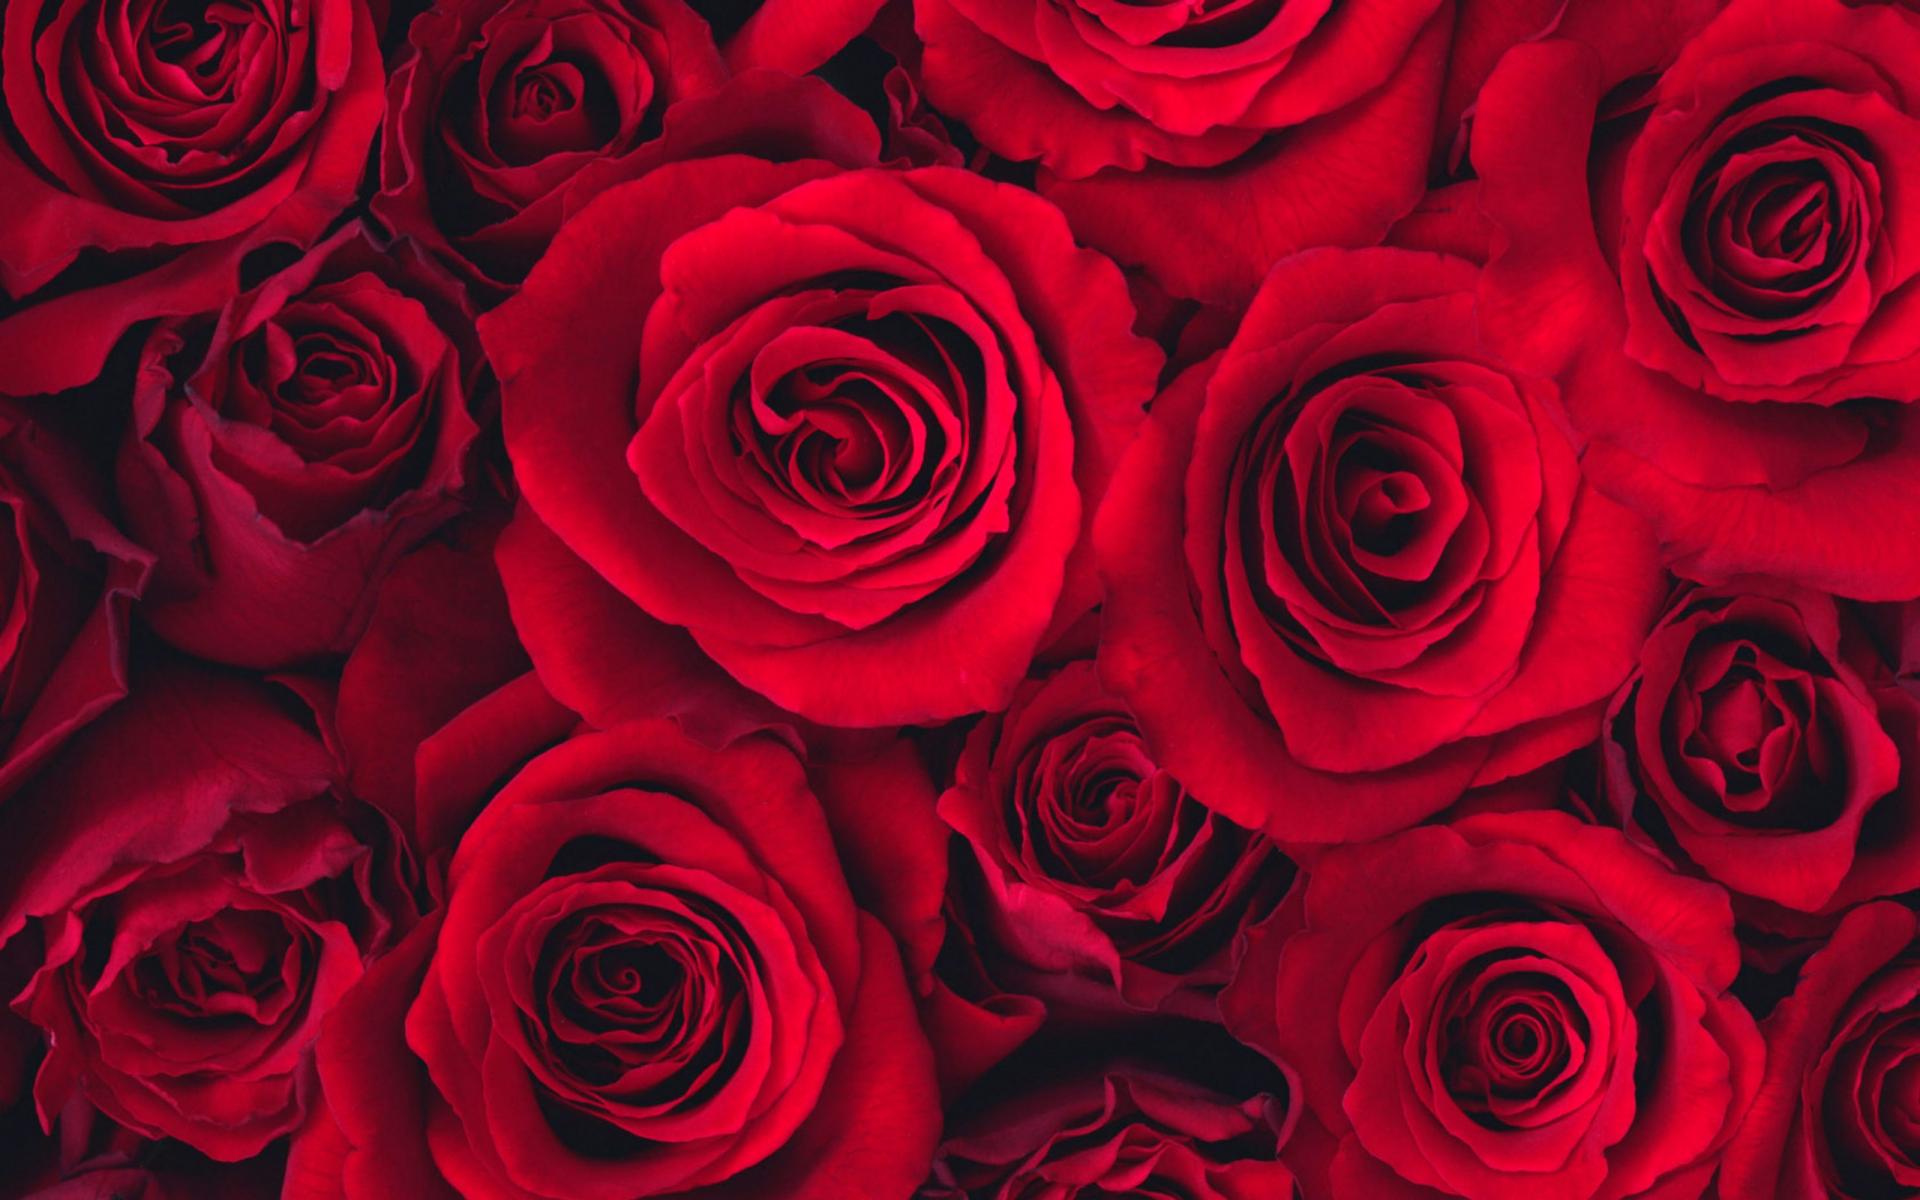 HD Quality Images of Red Roses › 1920x1200 – download for free